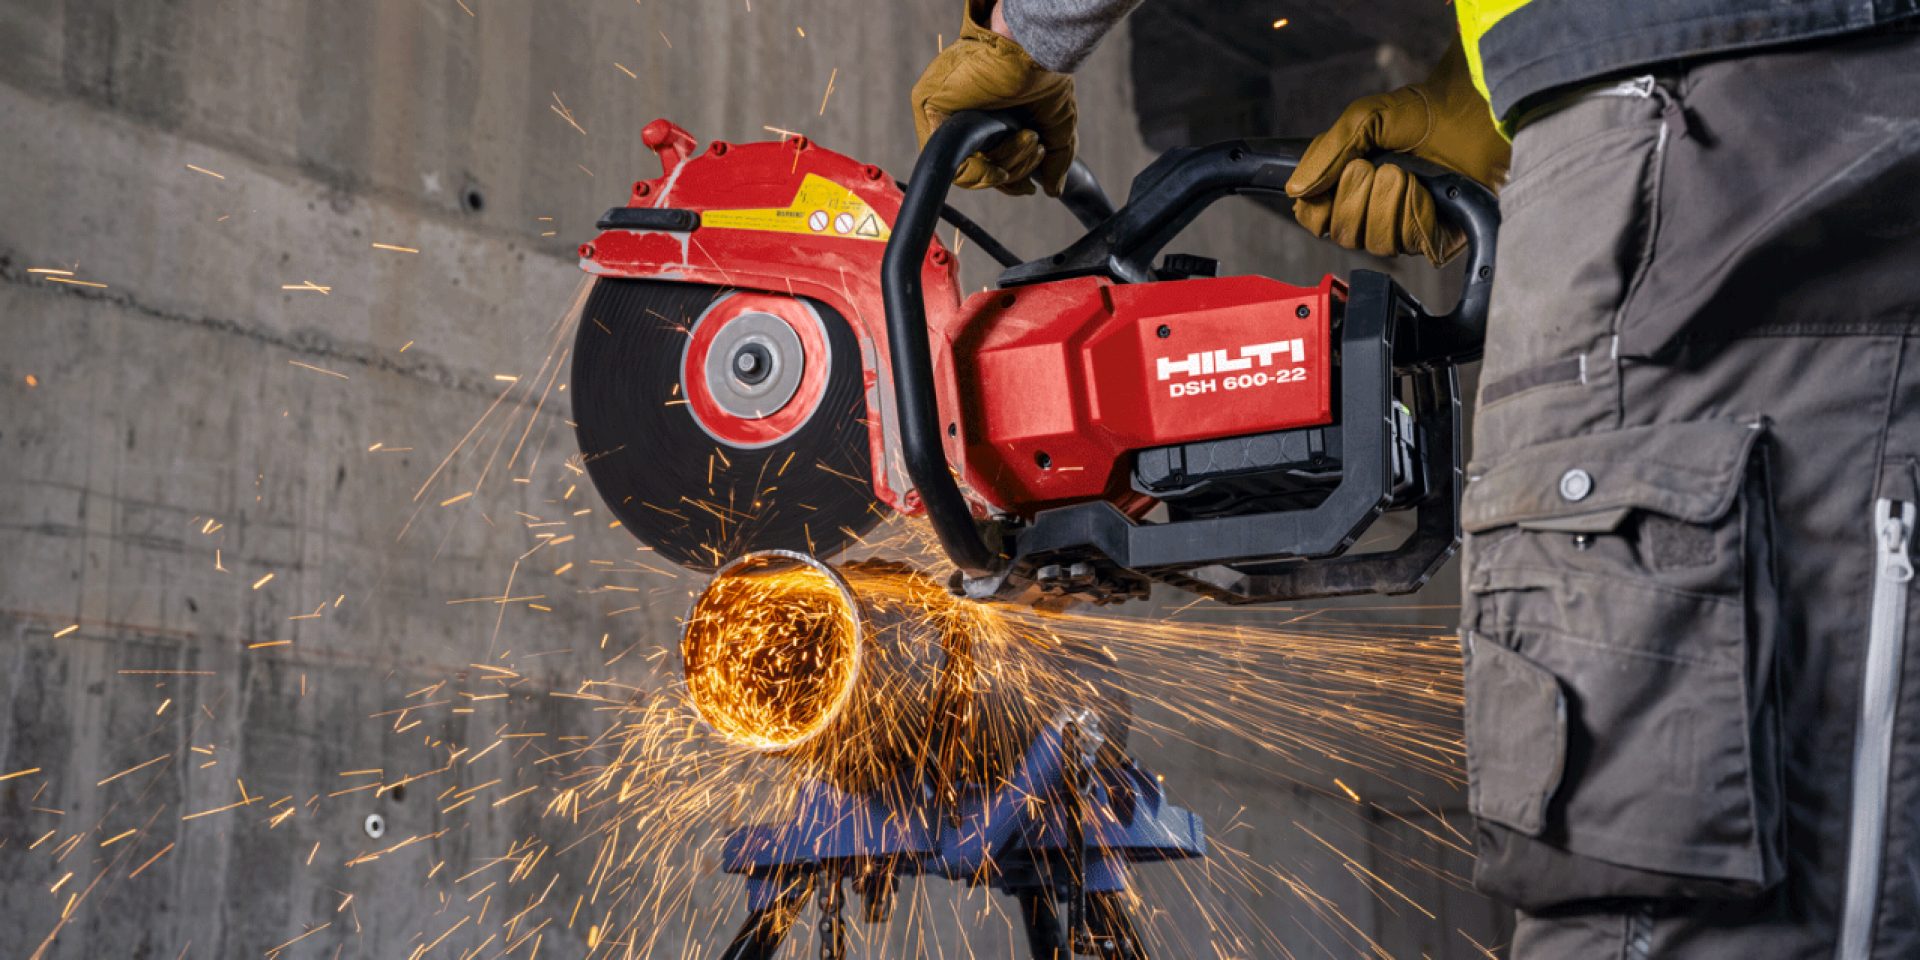 Whats New at Hilti Check out our latest products and innovations